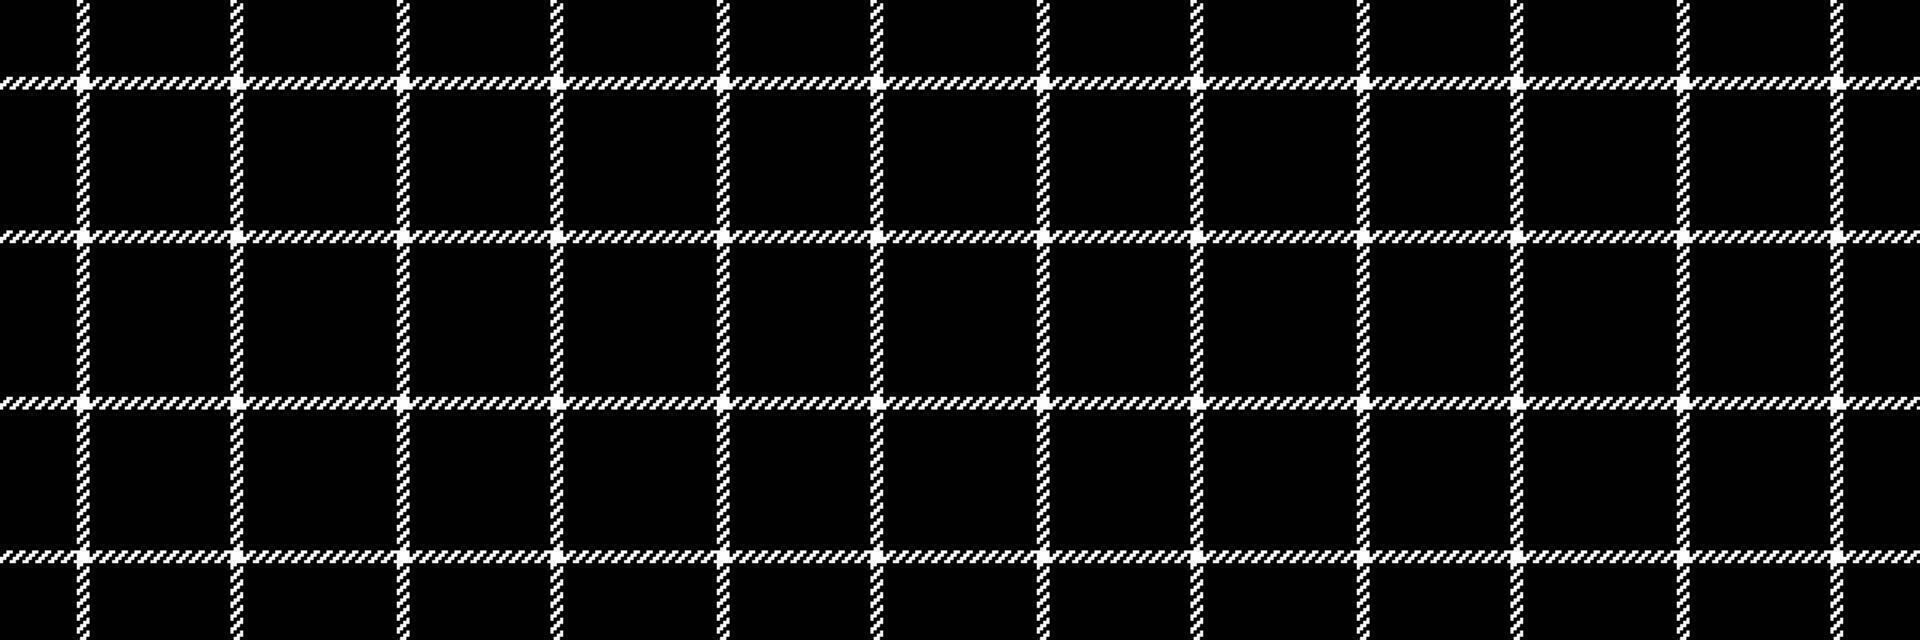 Feminine pattern textile tartan, tape plaid vector fabric. Platform check background texture seamless in black and white colors.